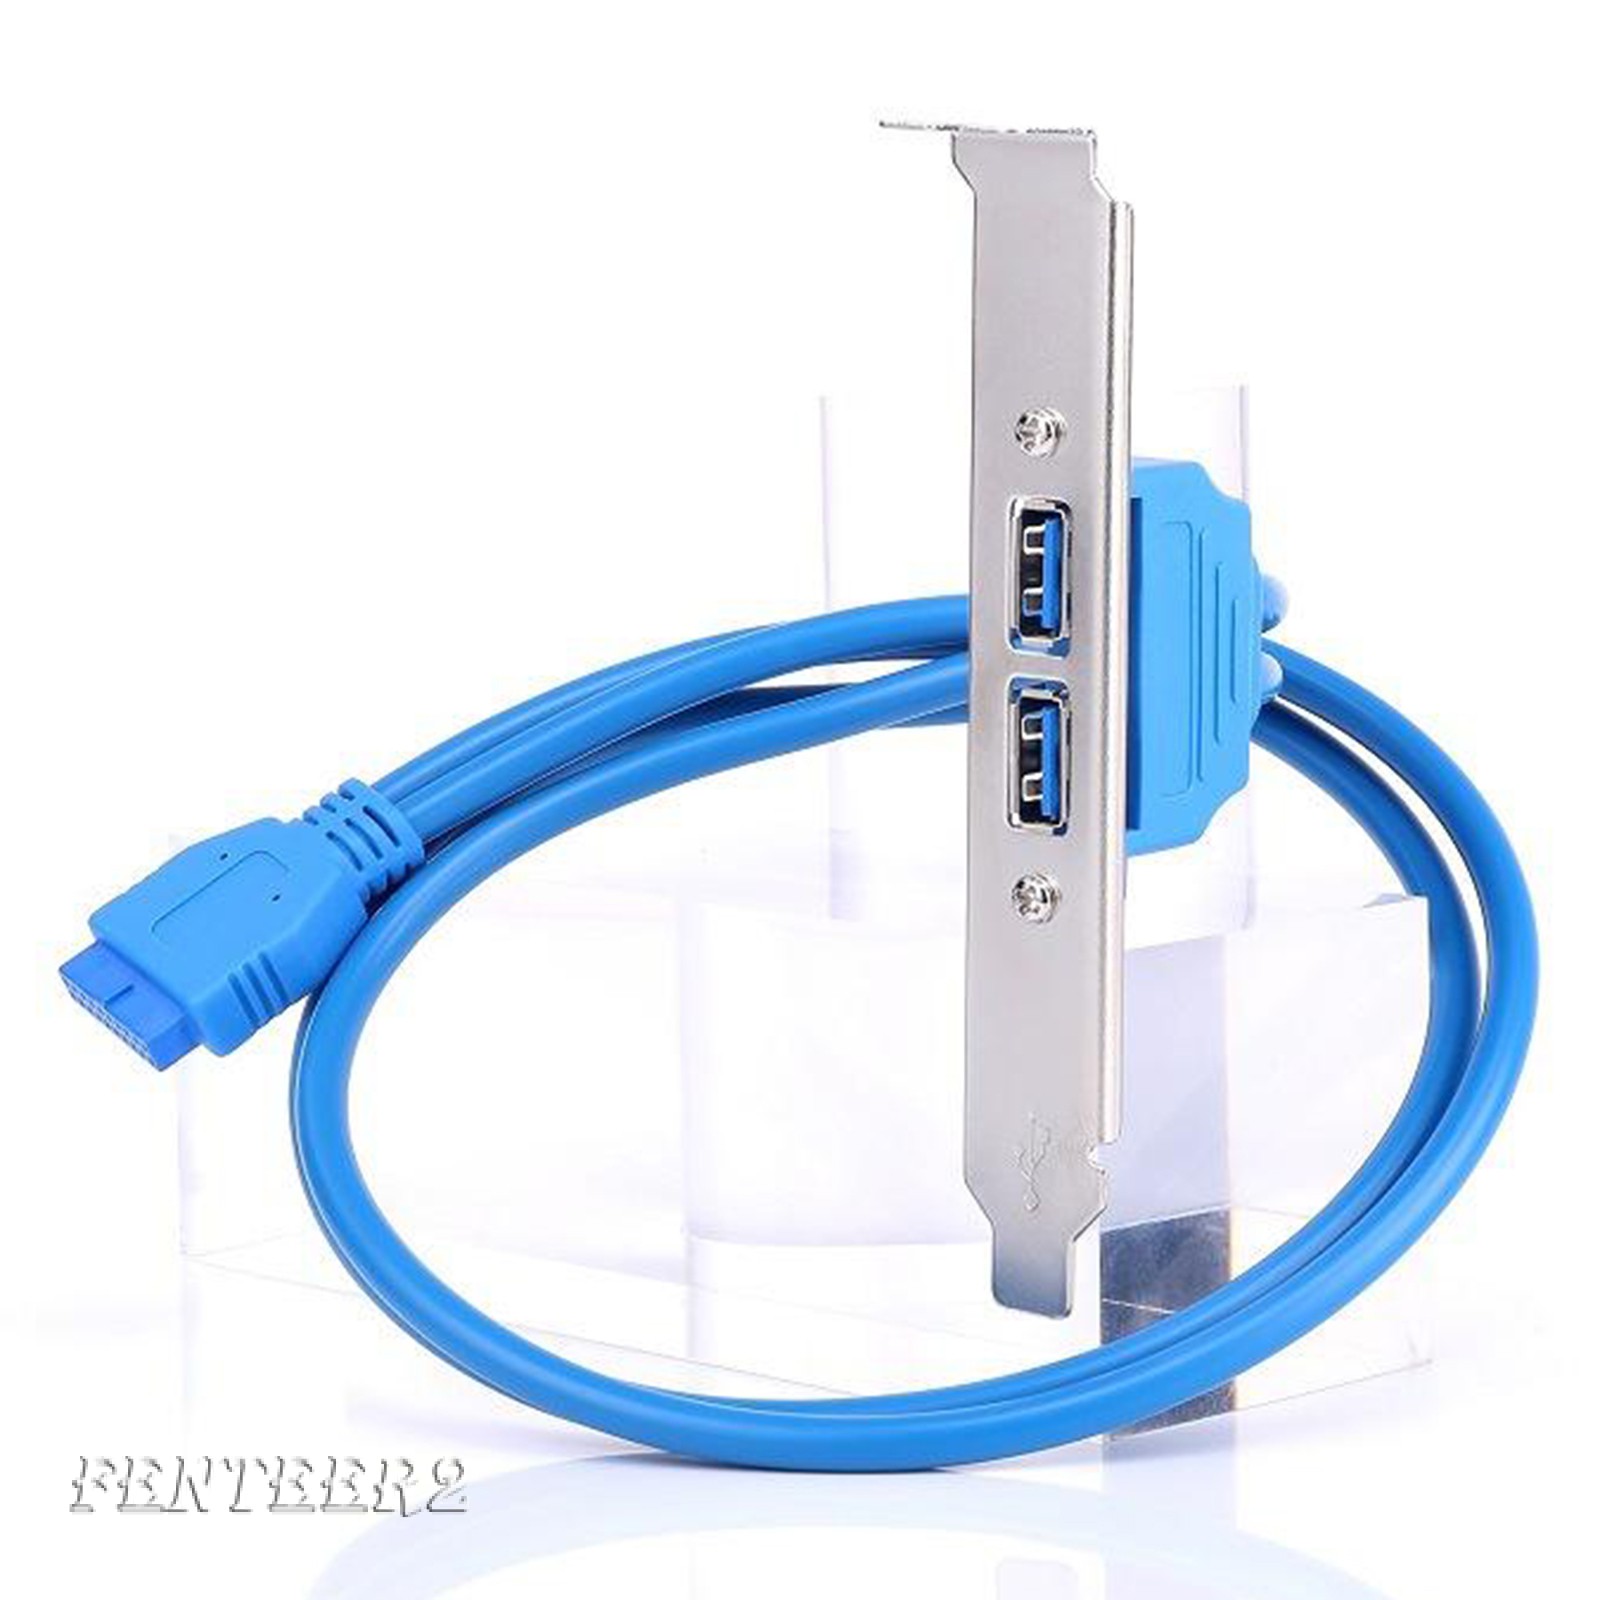 (Fenteer2 3c) Dual 2 Ports Usb 3.0 Back Panel To 20pin Header Cable With Bracket | BigBuy360 - bigbuy360.vn